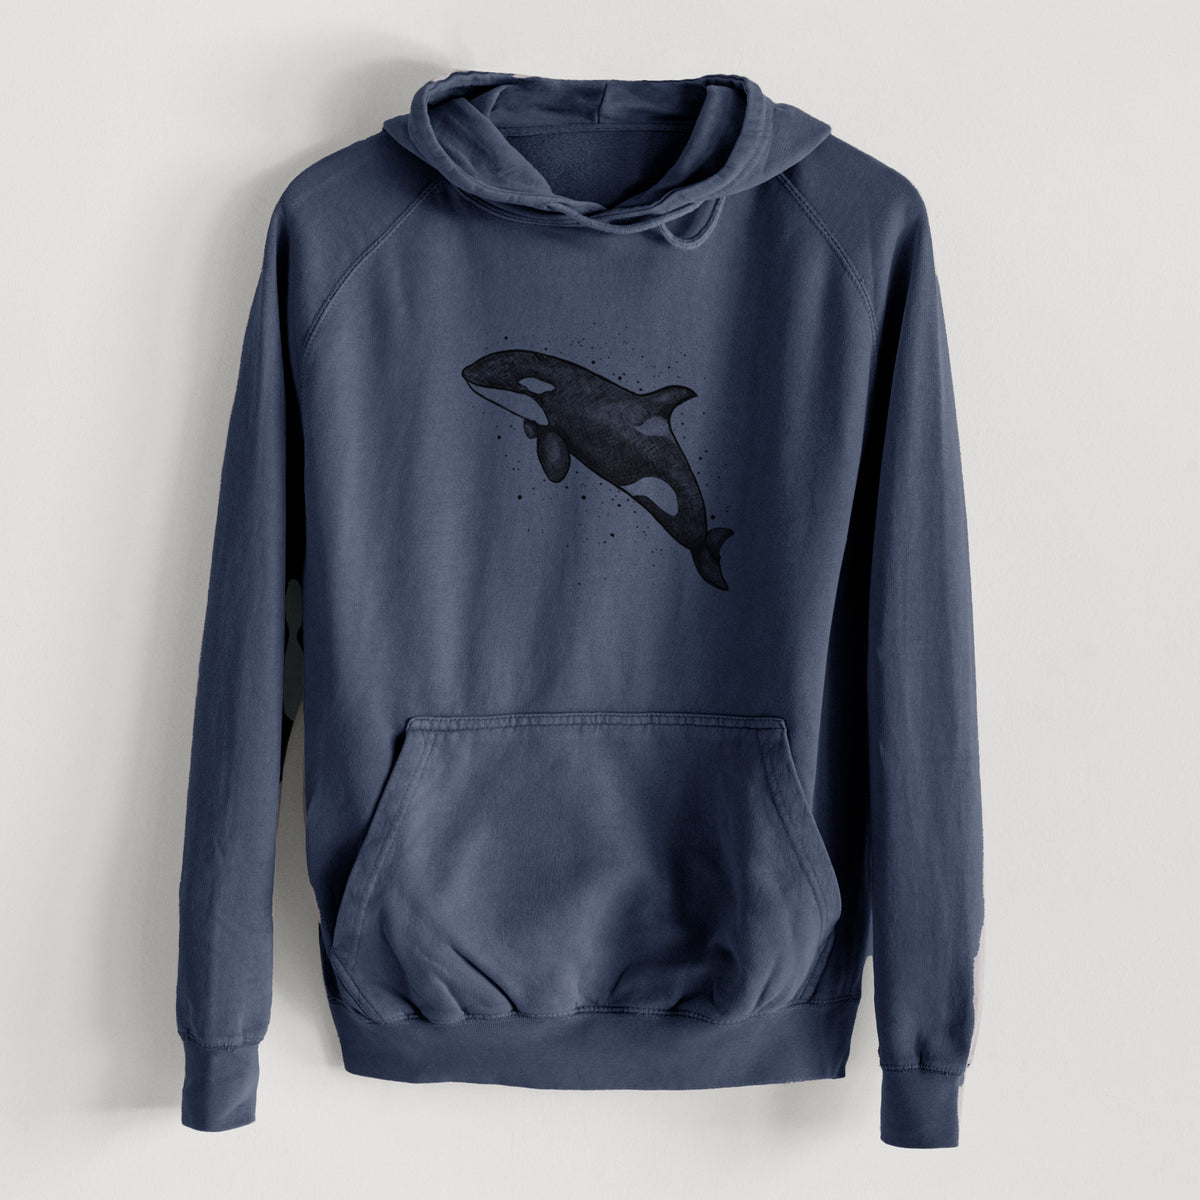 Orca Whale  - Mid-Weight Unisex Vintage 100% Cotton Hoodie